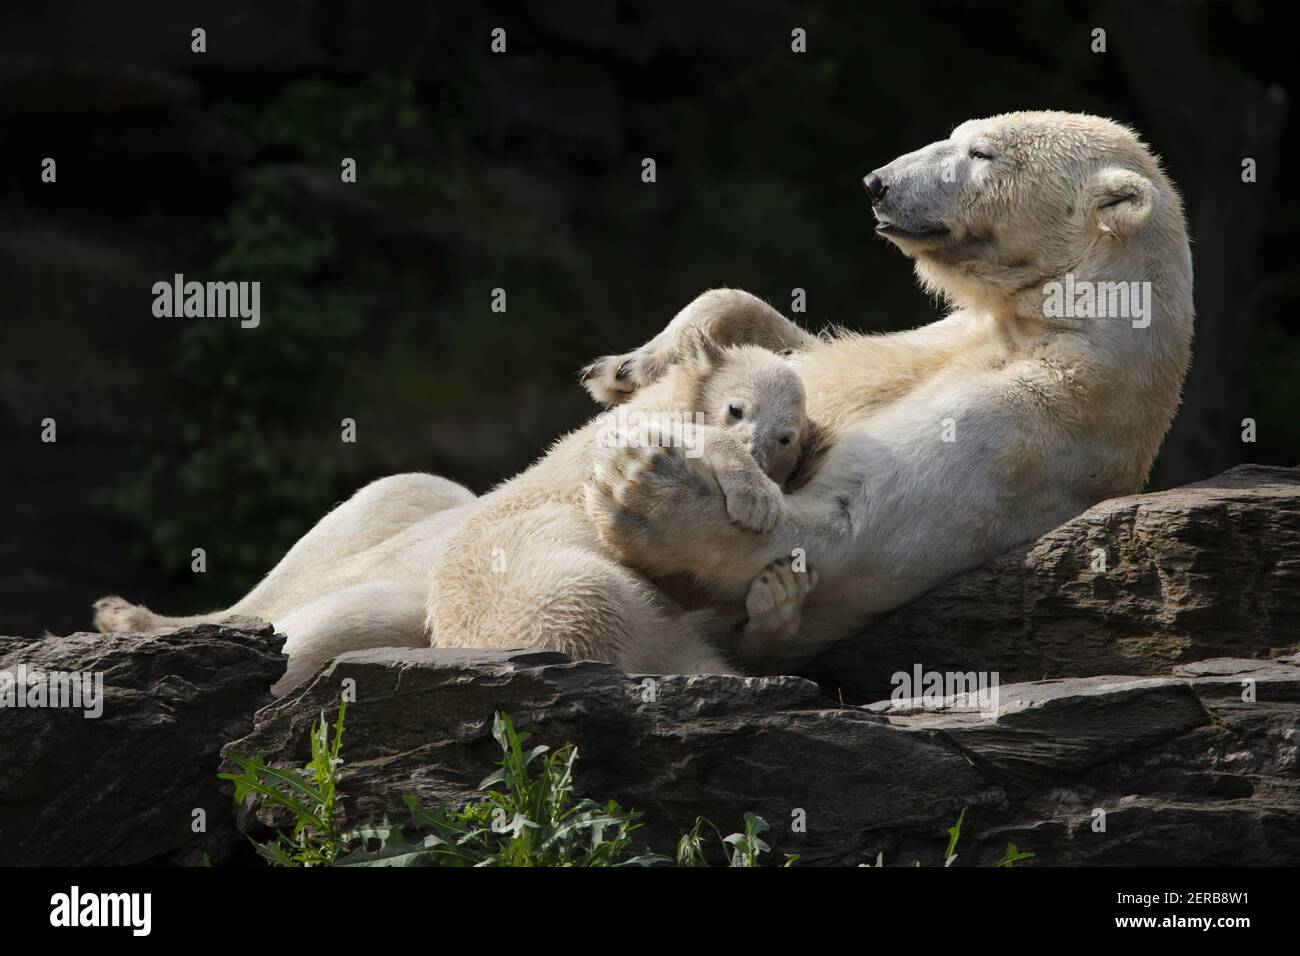 Polar bear (Ursus maritimus) with its cub at Tierpark Berlin in Berlin, Germany. Female polar bear Hertha was born on 1st December 2018 to her mother Tonja and father Wolodja. Stock Photo